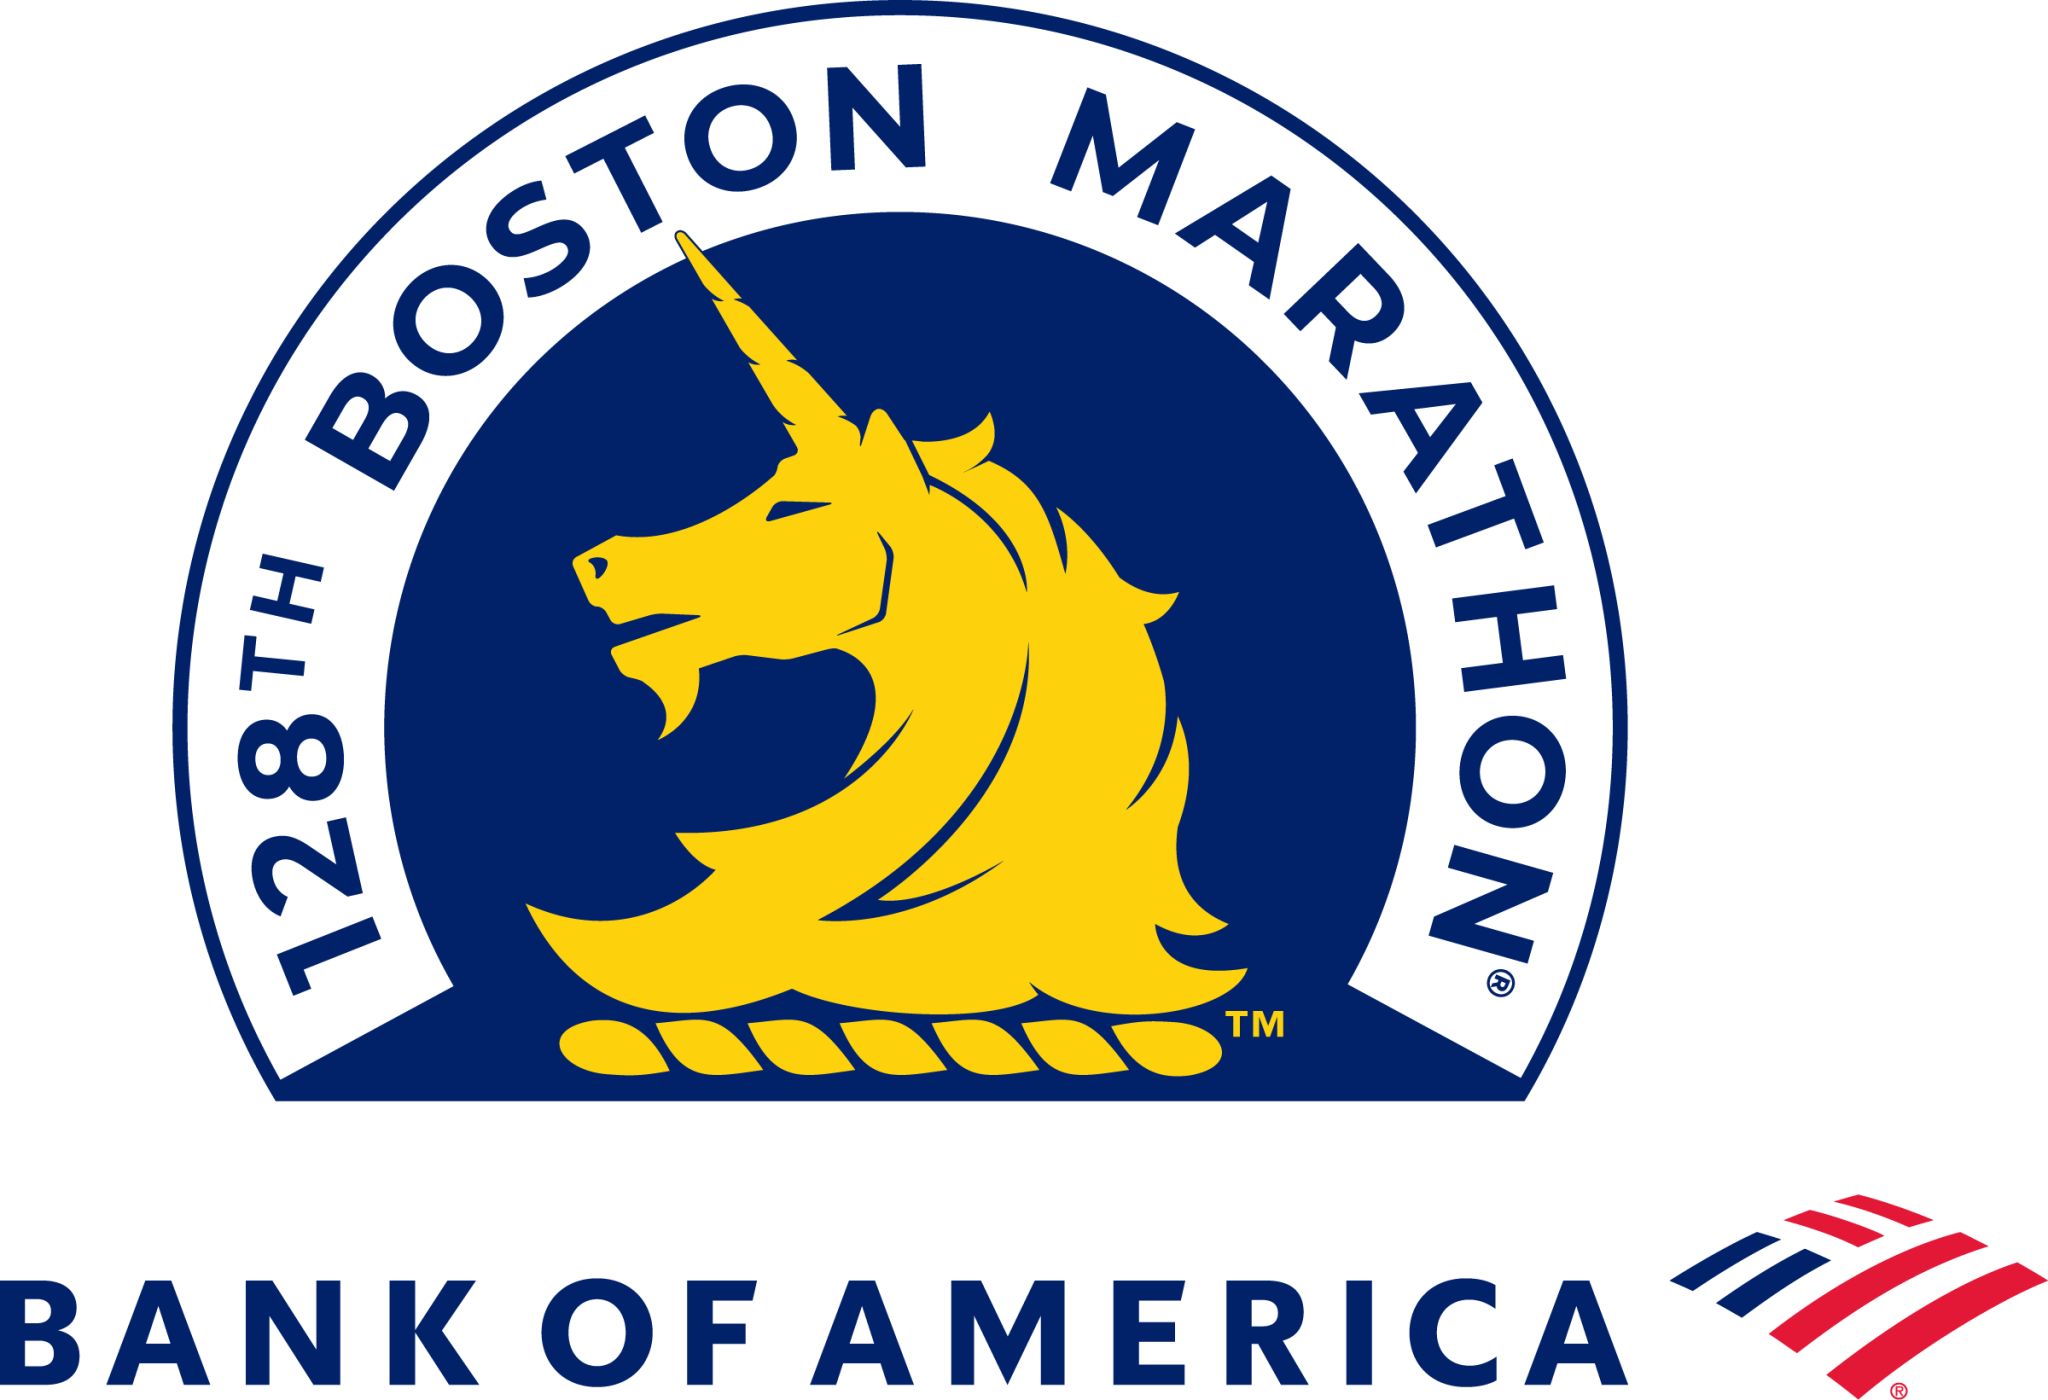 The Boston Marathon now has its first presenting sponsor, The Financial